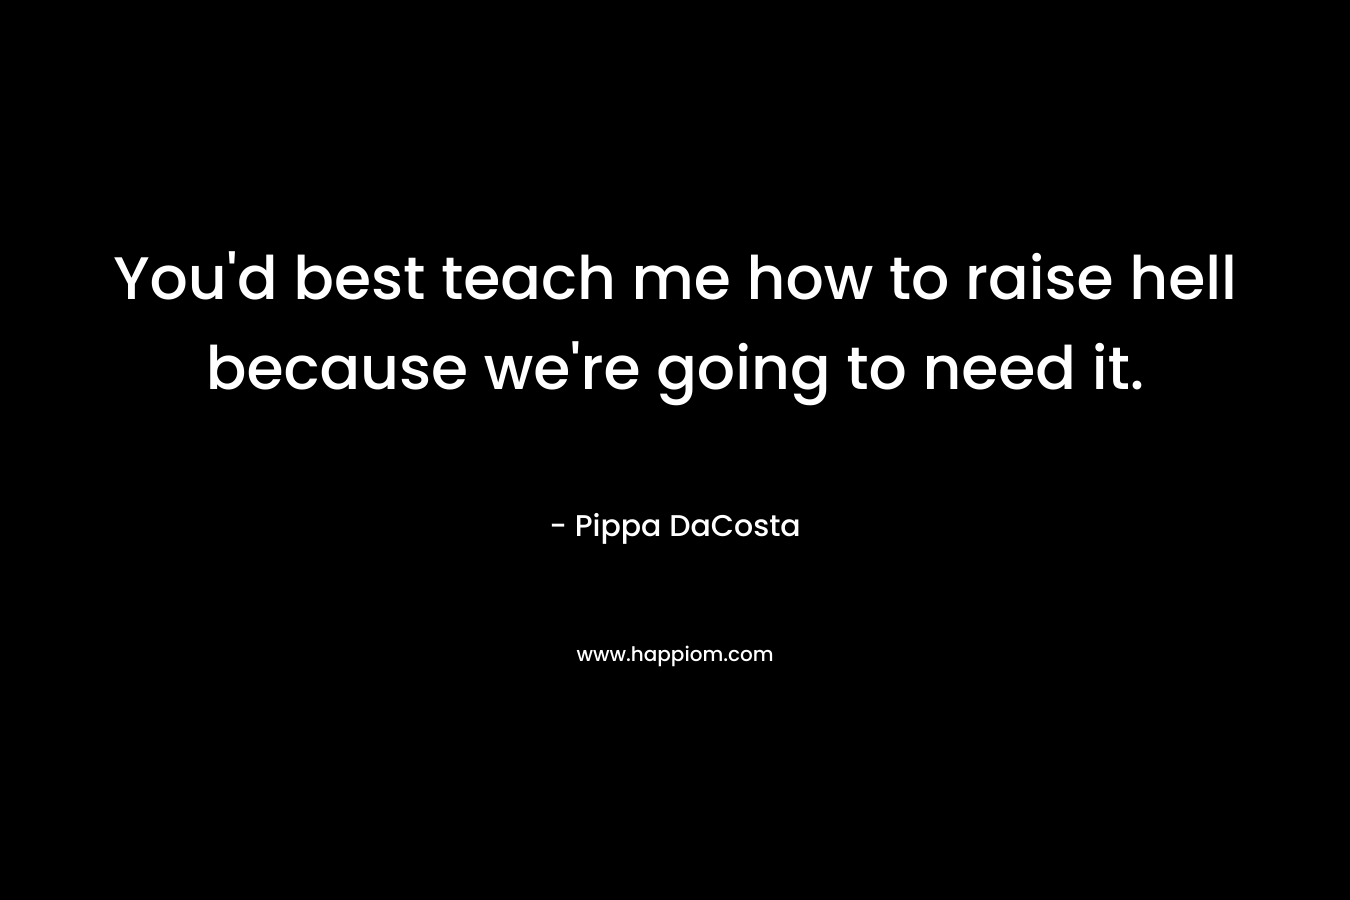 You’d best teach me how to raise hell because we’re going to need it. – Pippa DaCosta